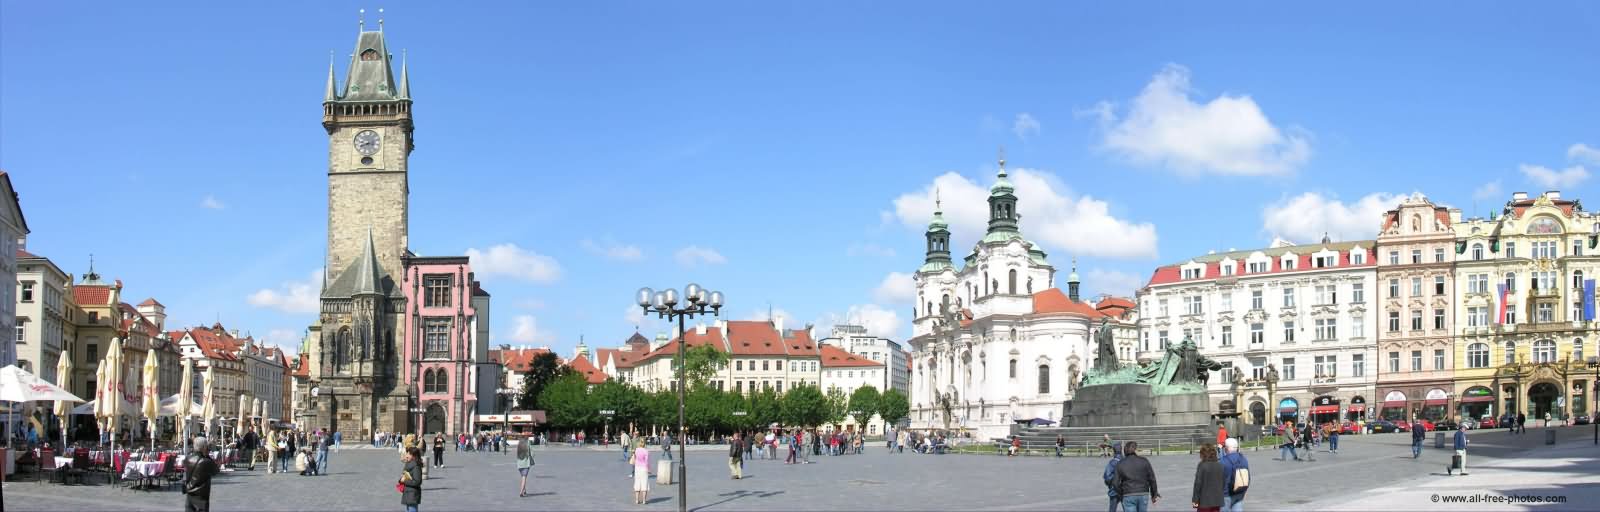 Panorama View Of The Old Town Square In Prague